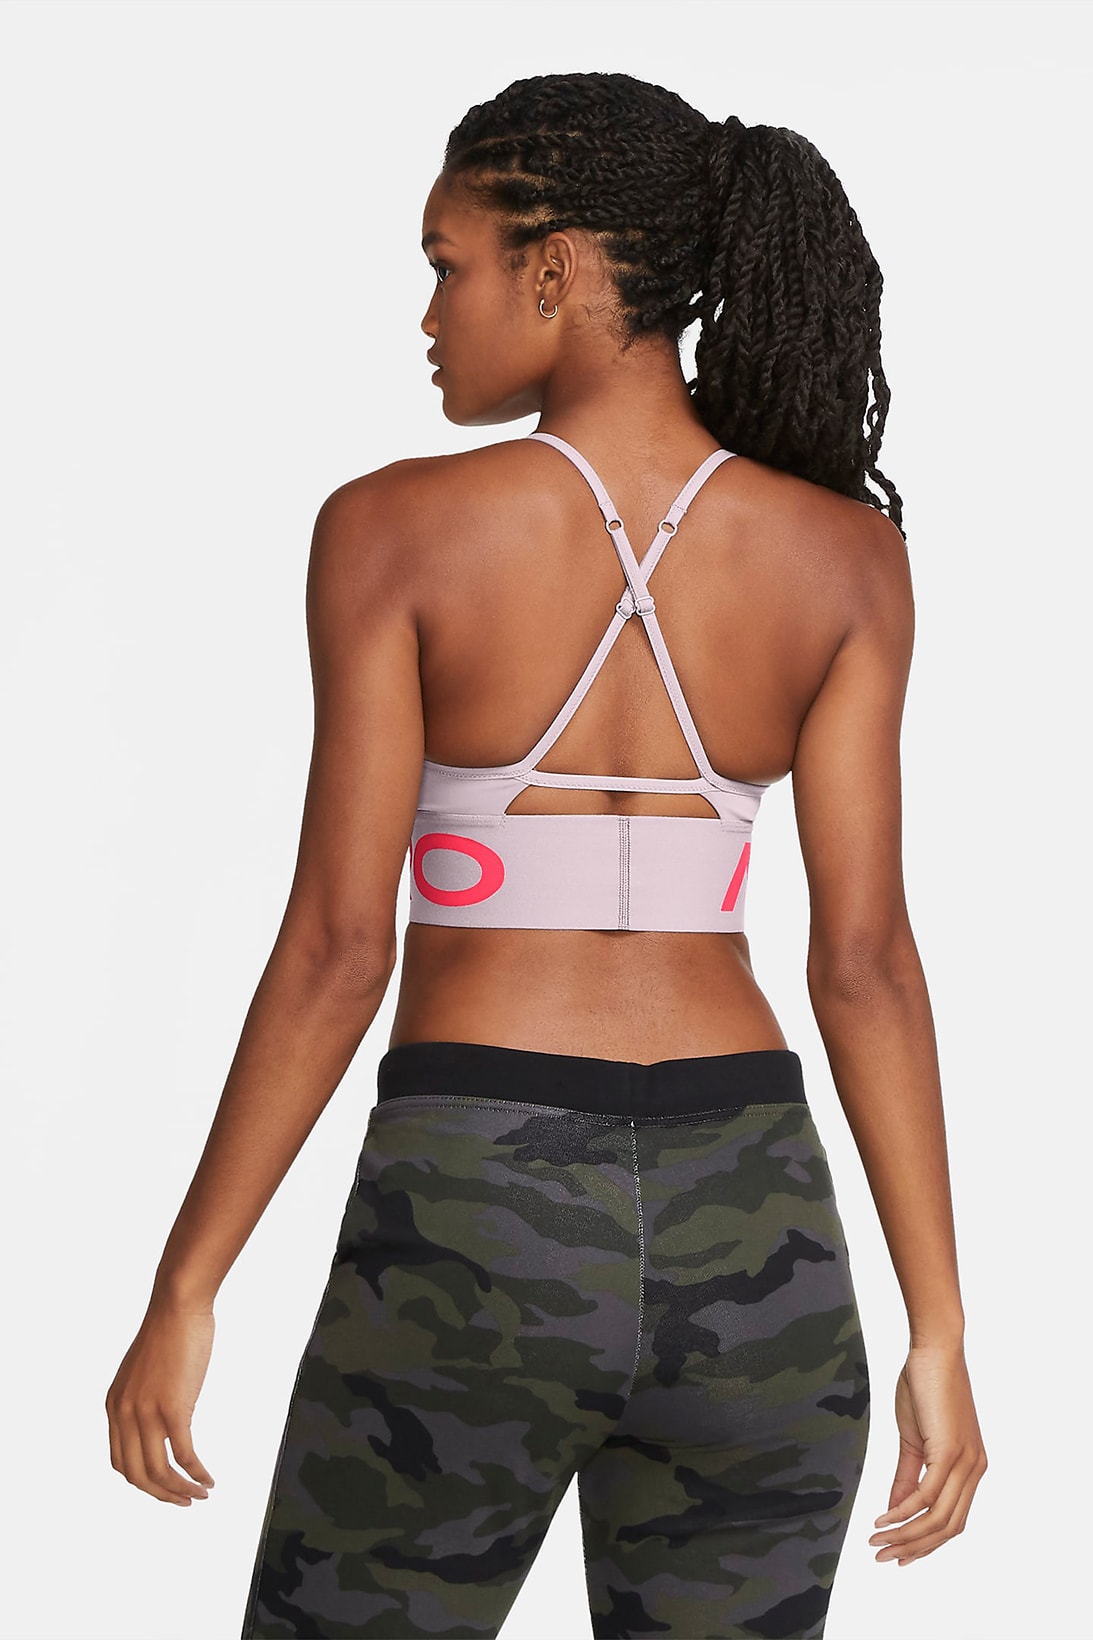 Work Out in Style With Nike's Pink Pro Indy Sports Bra and Shorts